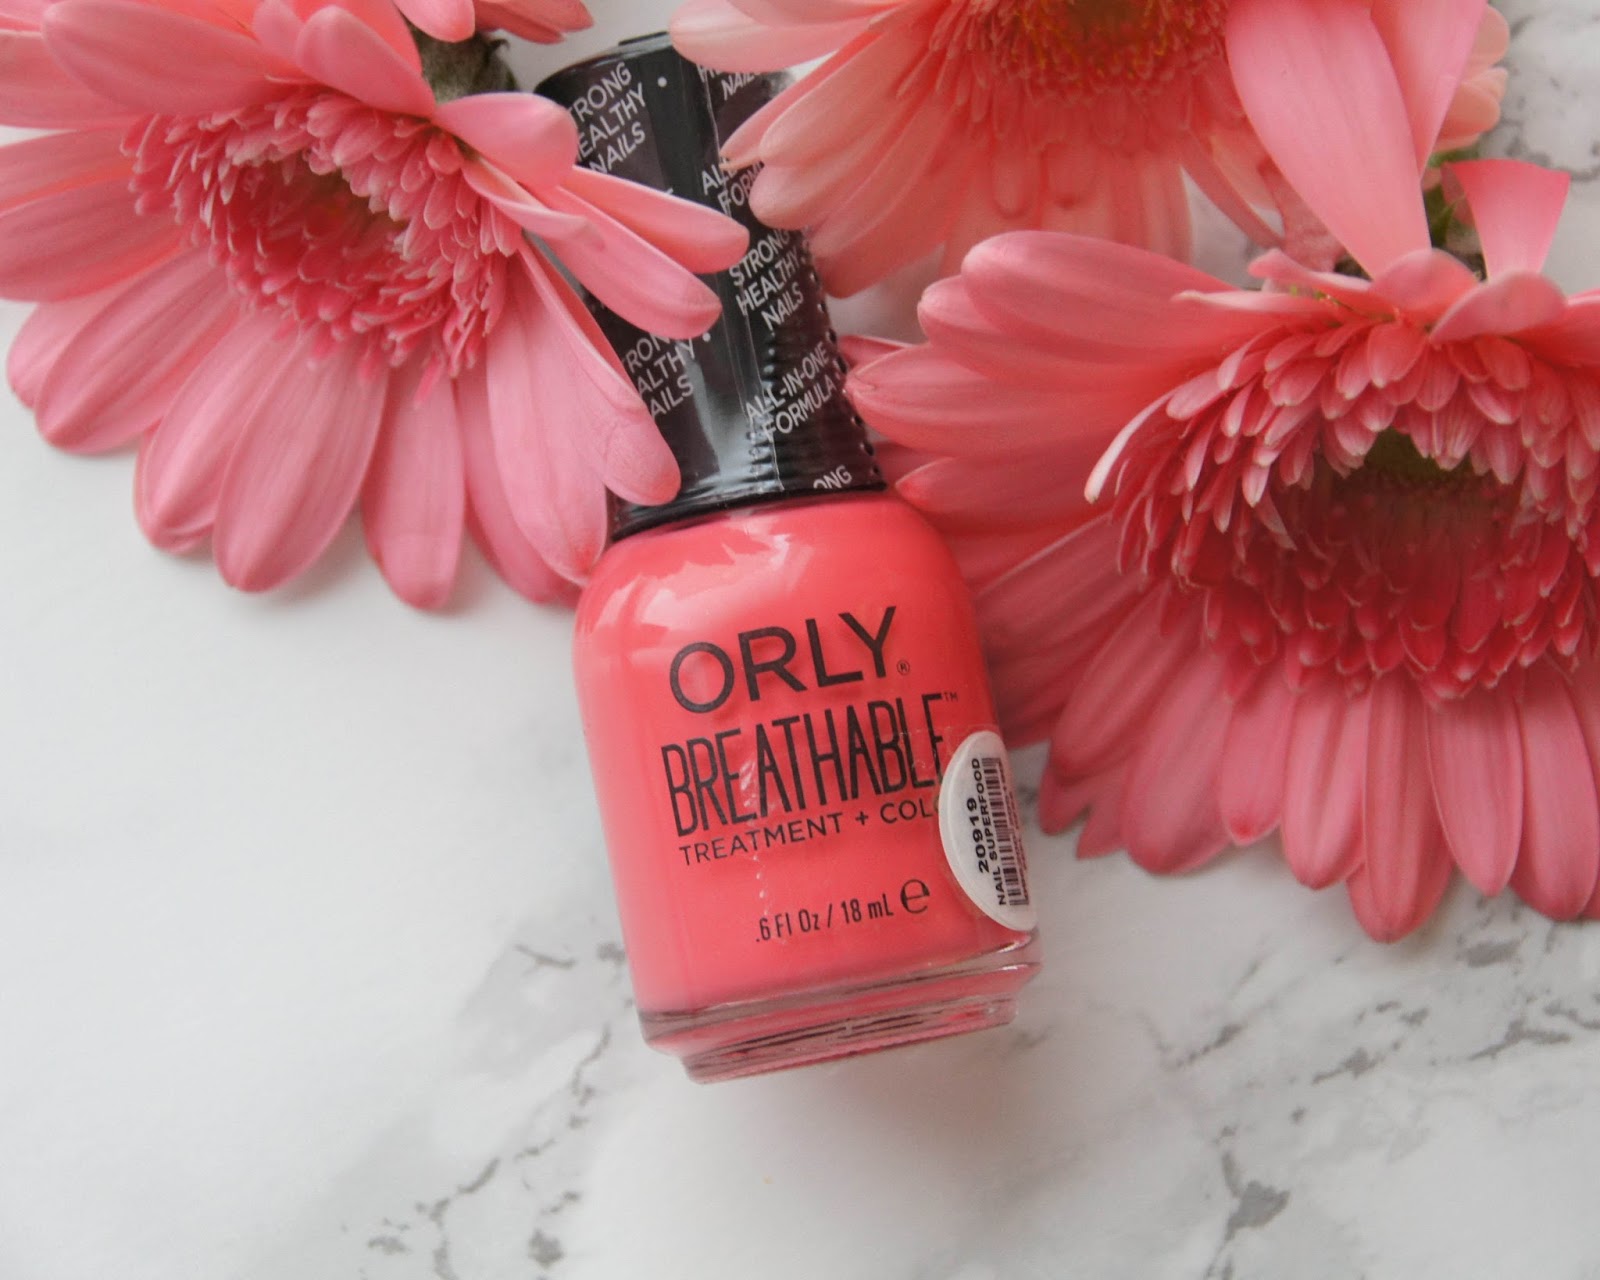 10. Orly Breathable Treatment + Color Nail Polish in "Love My Nails" - wide 4